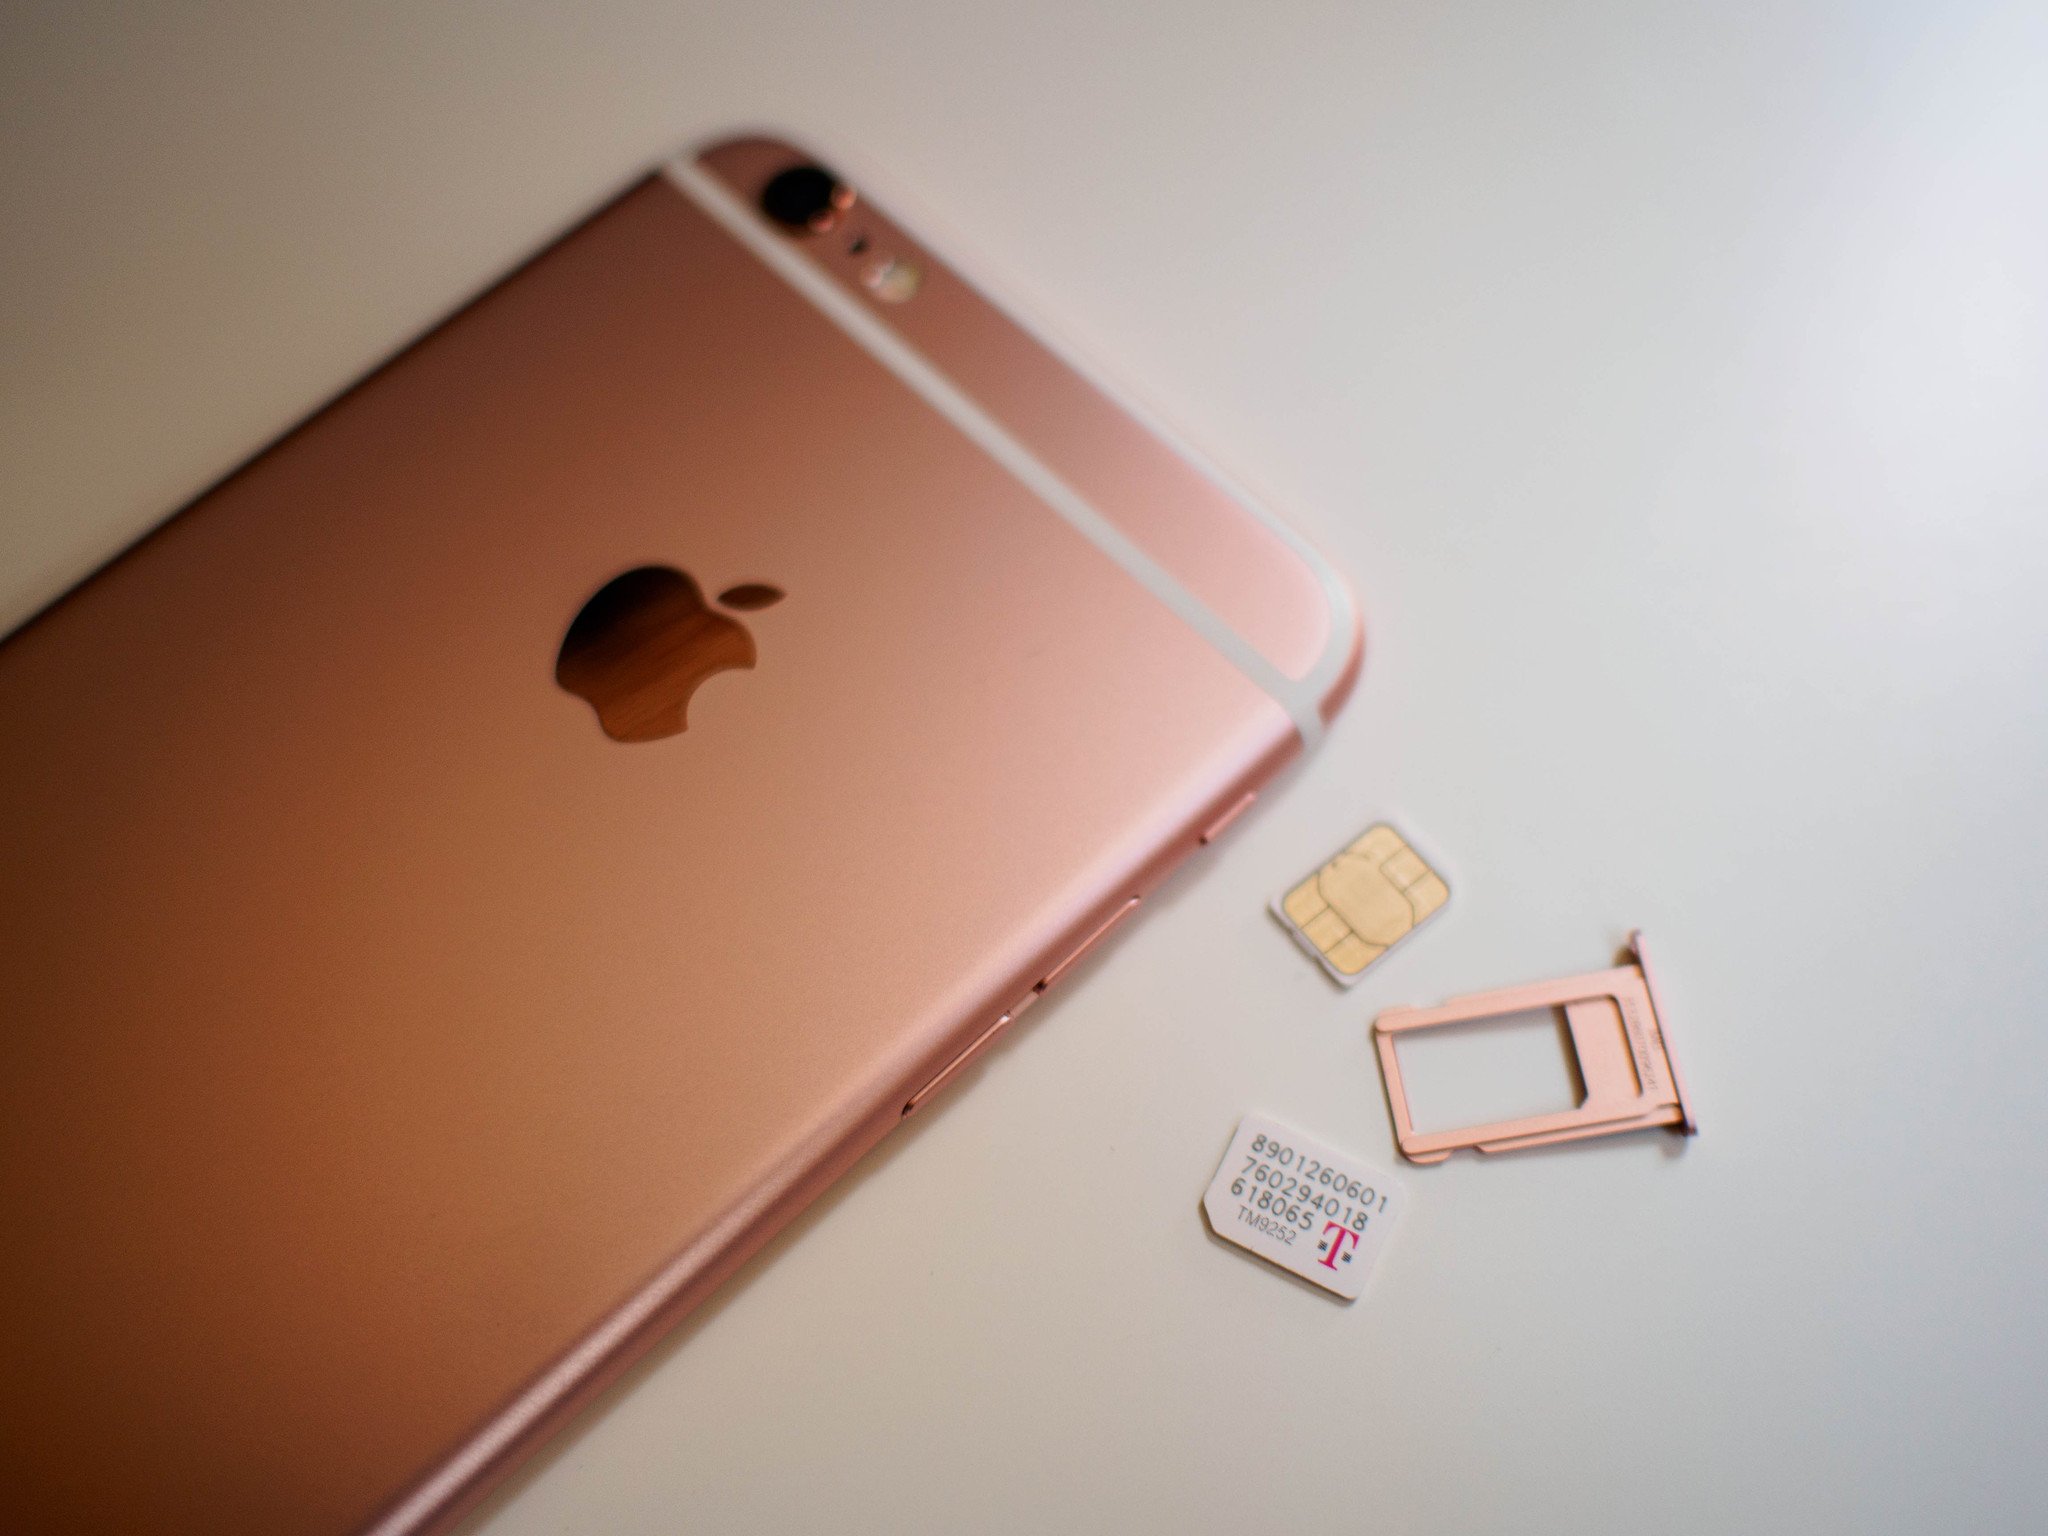 What is a SIM card and what does it do? | iMore